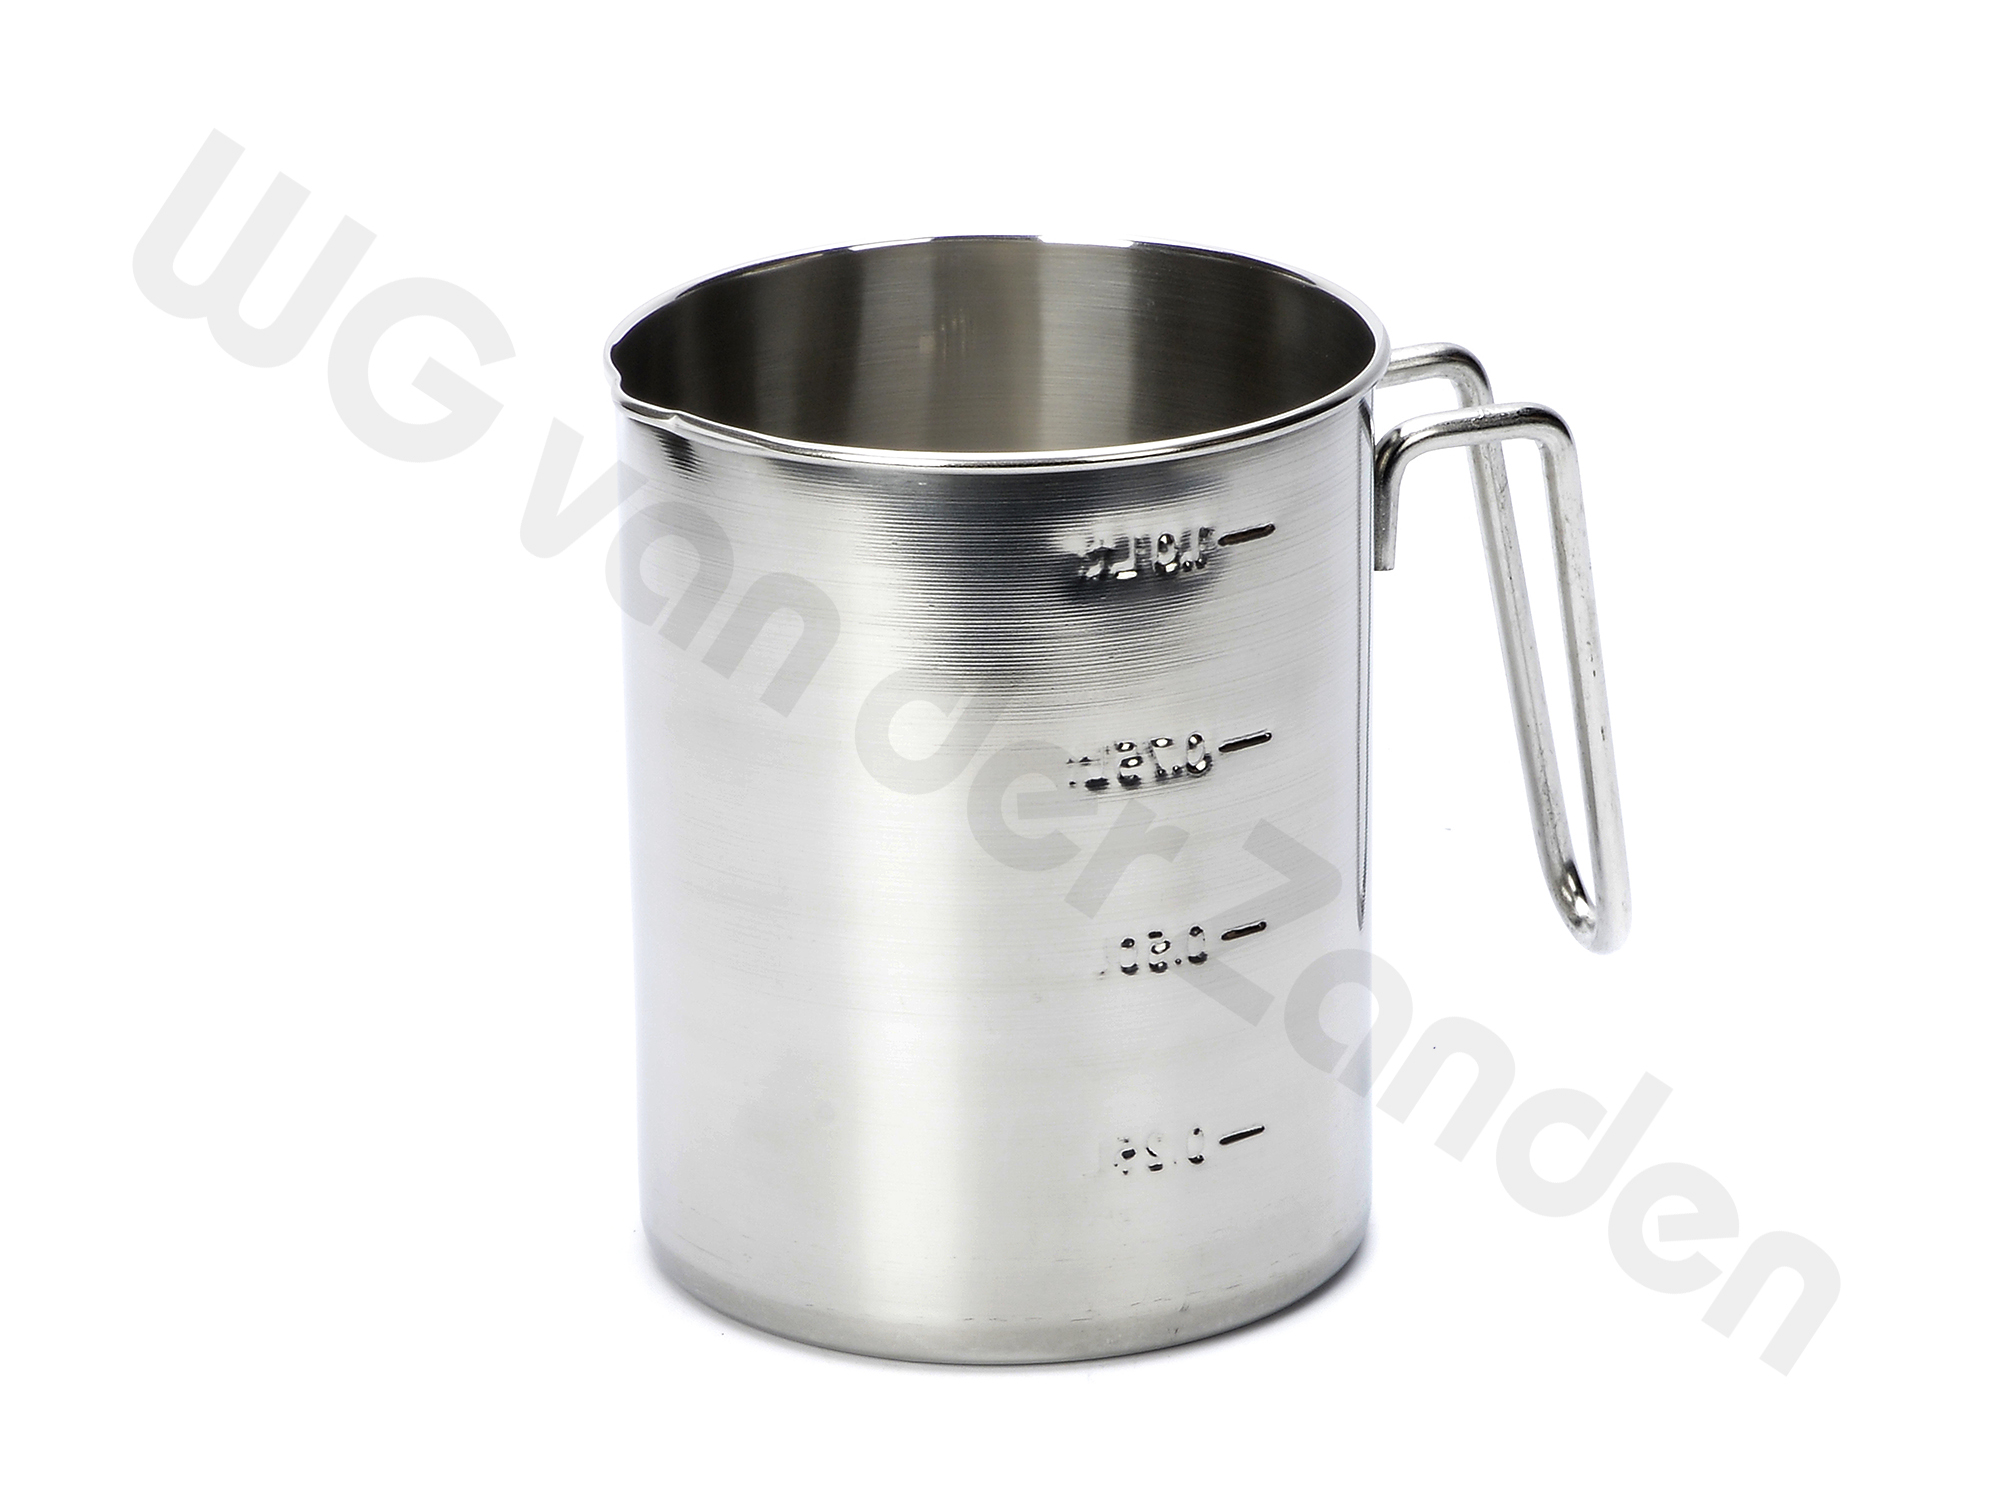 257354 MEASURING CUP S/S 2 LTR